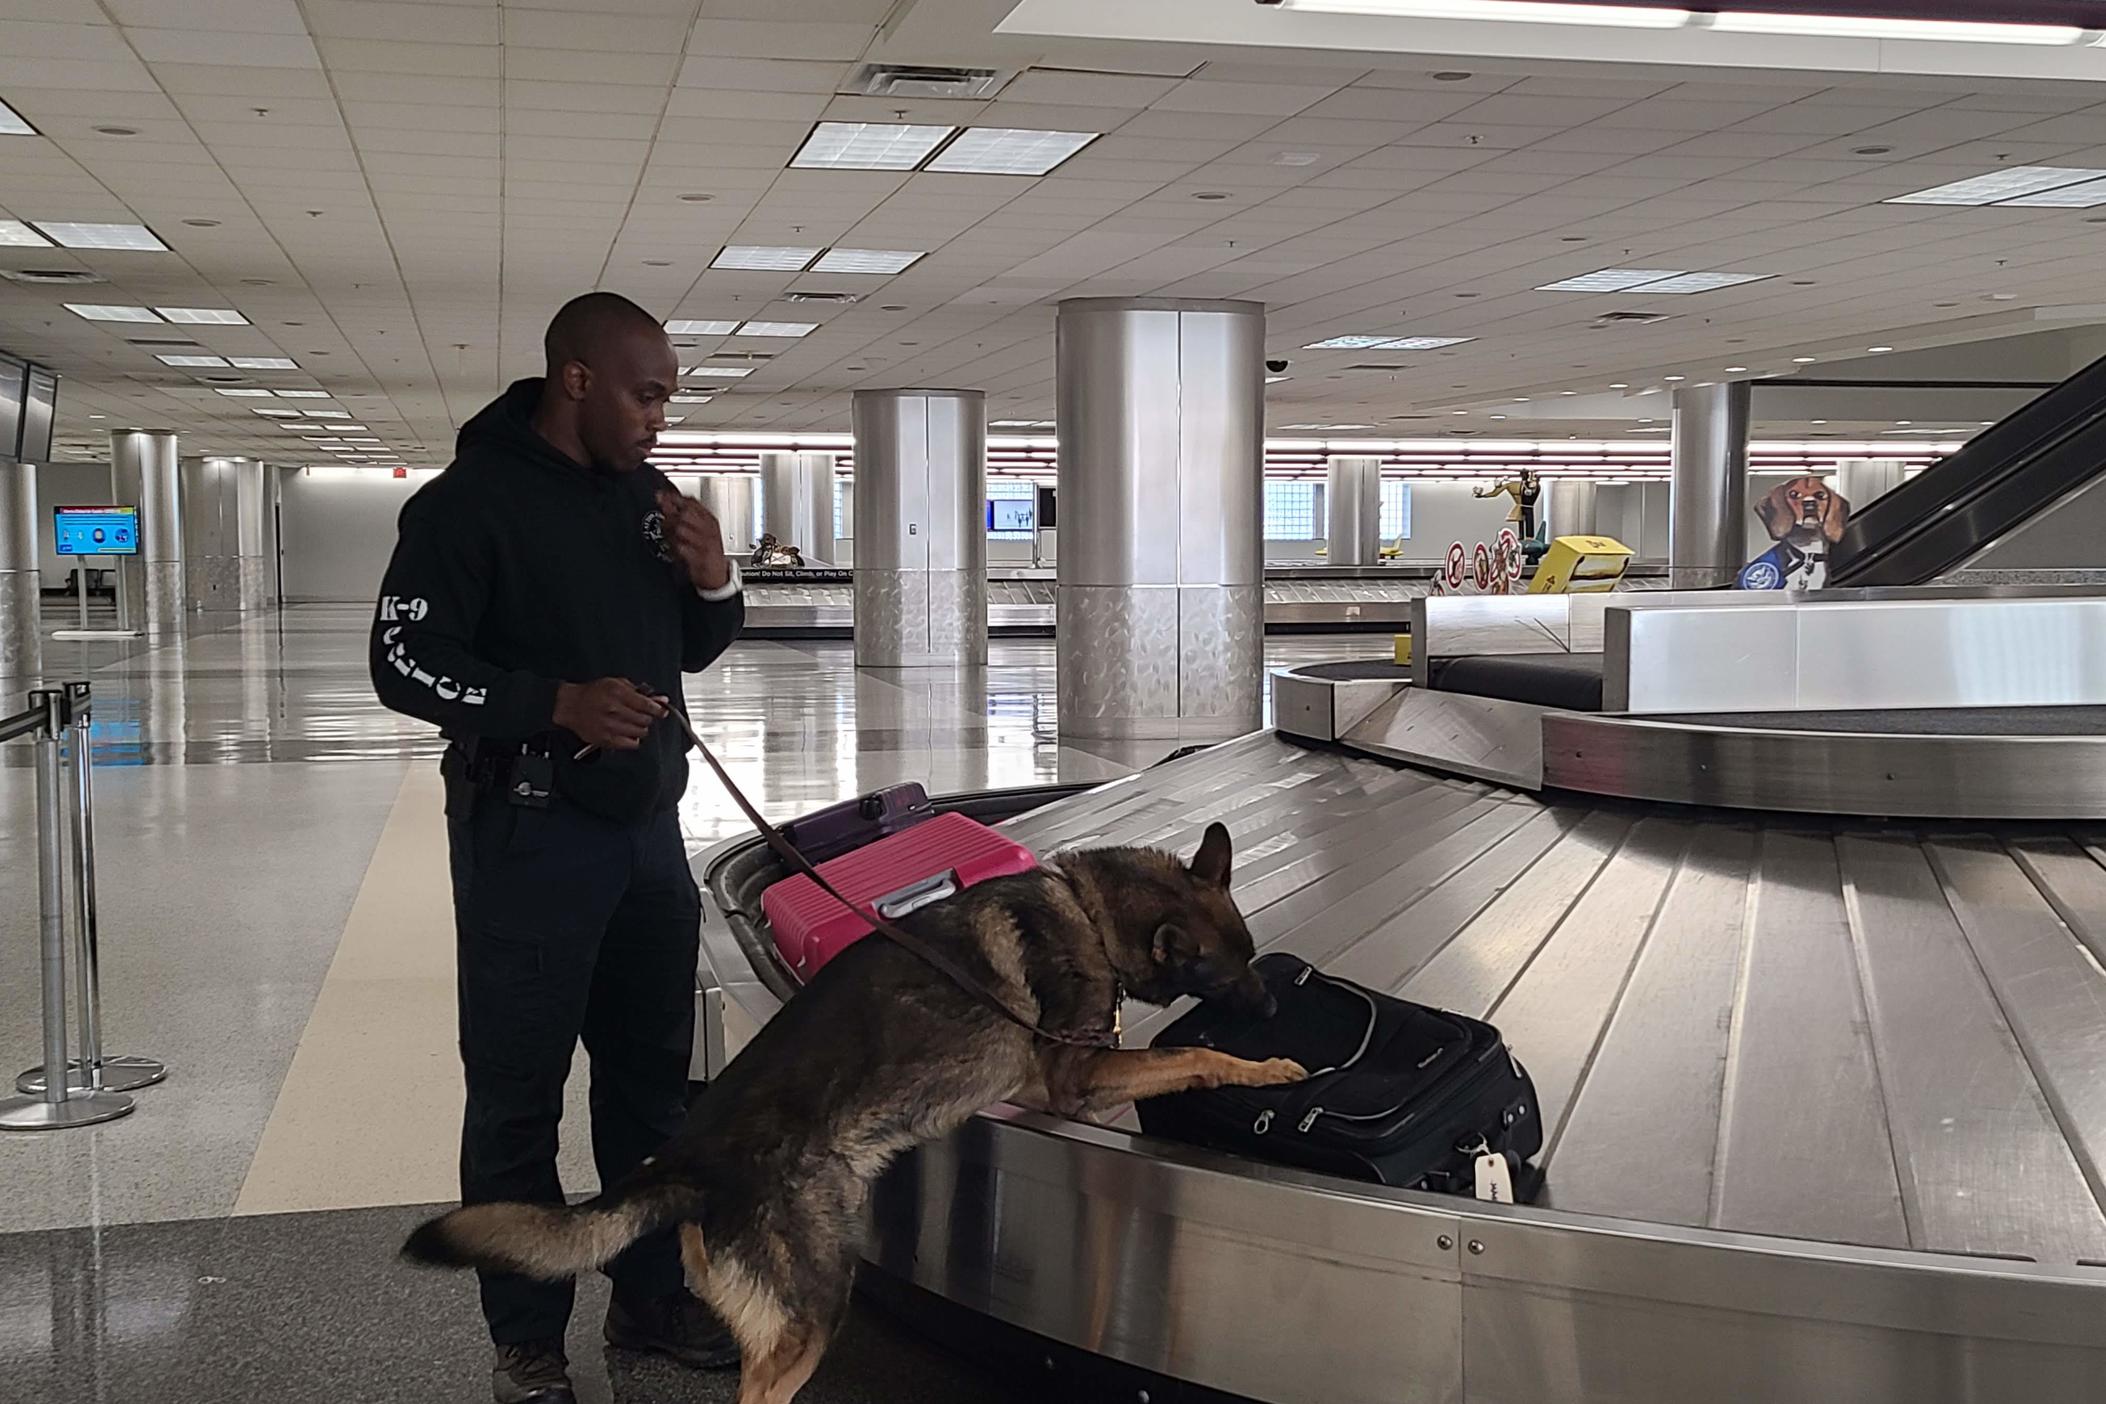 Clayton County police officer Antonio Kendrick and K-9 Homer inspect luggage at a training conference for K-9 officer teams held at Hartsfield-Jackson International Airport in October 2021.